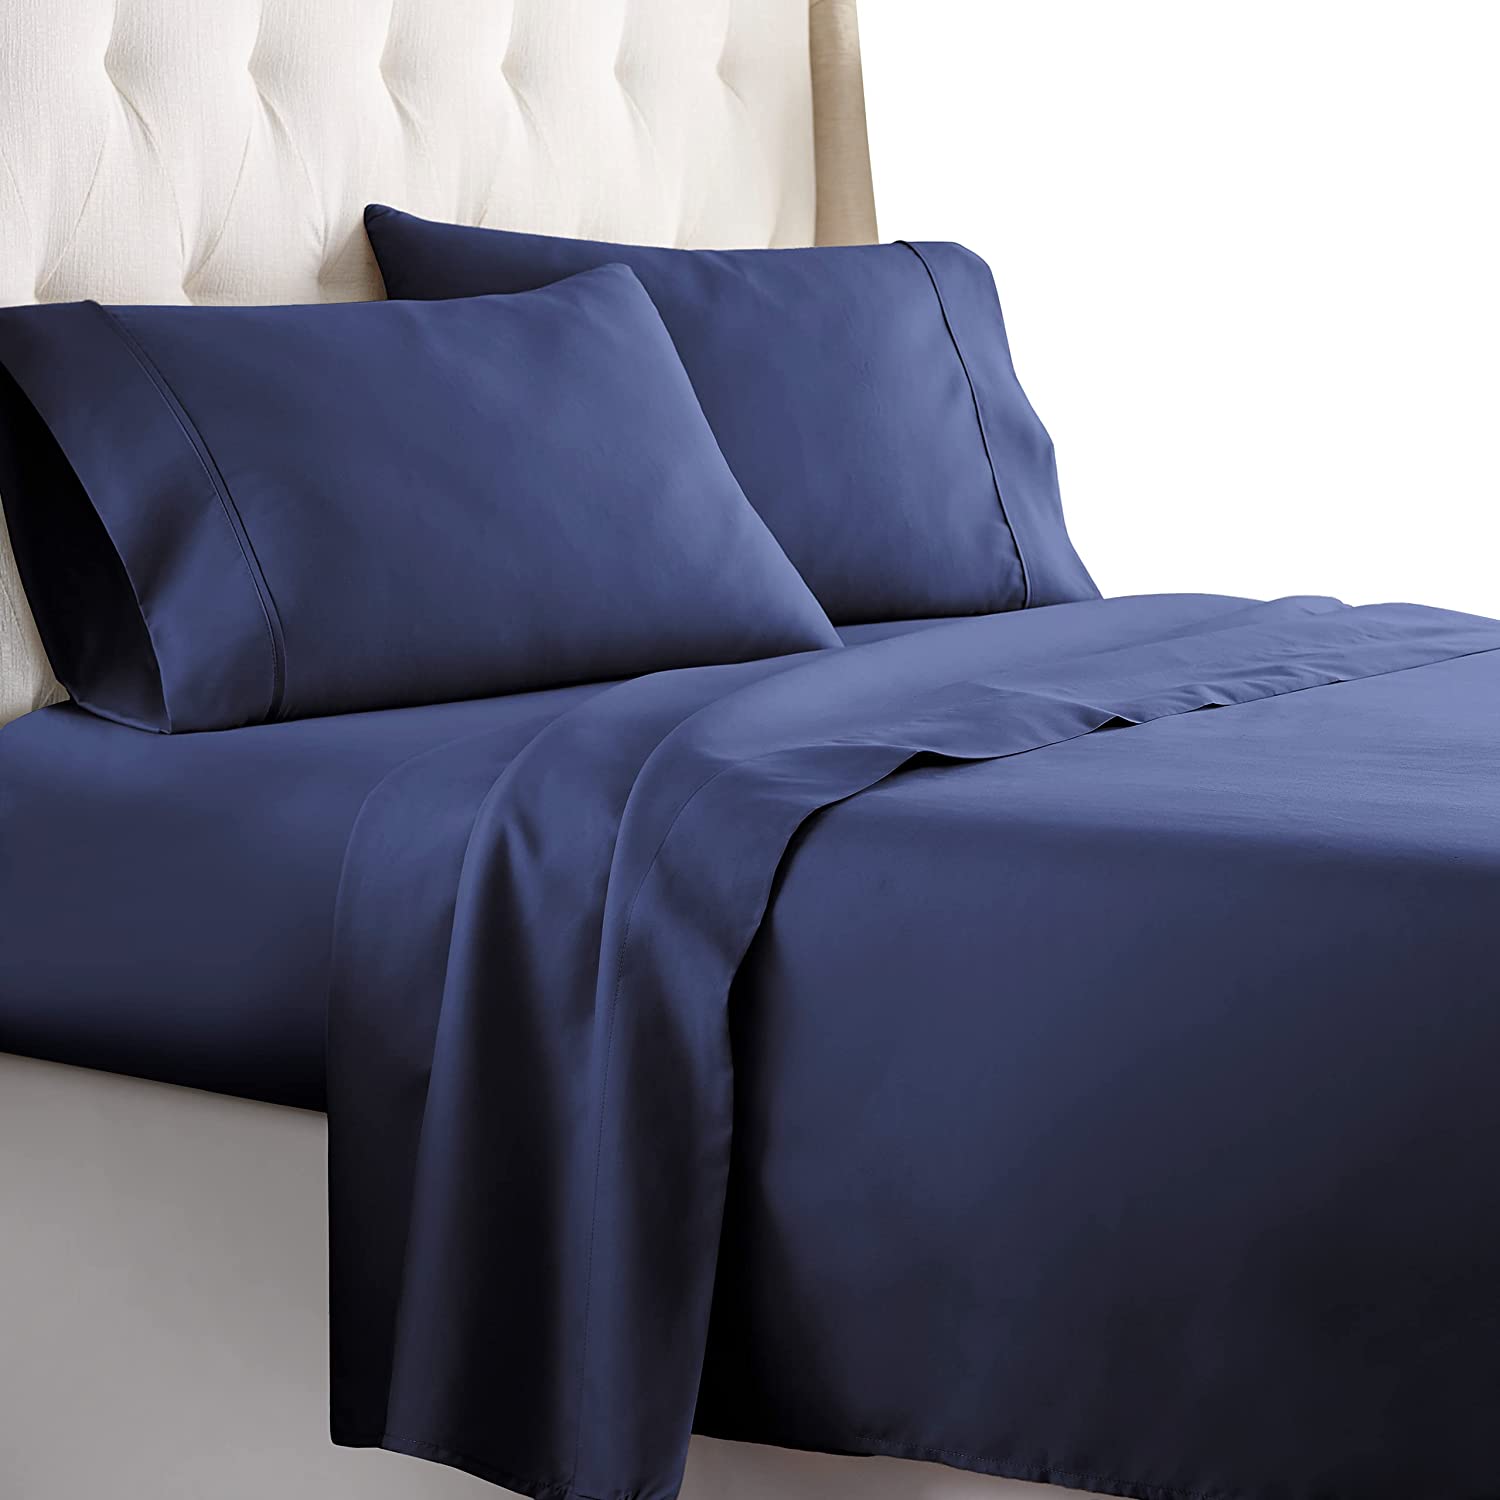 Buy Egyptian Cotton 1200 Thread Count Navy Blue Sheet Set at EgyptianHomeLinens.com